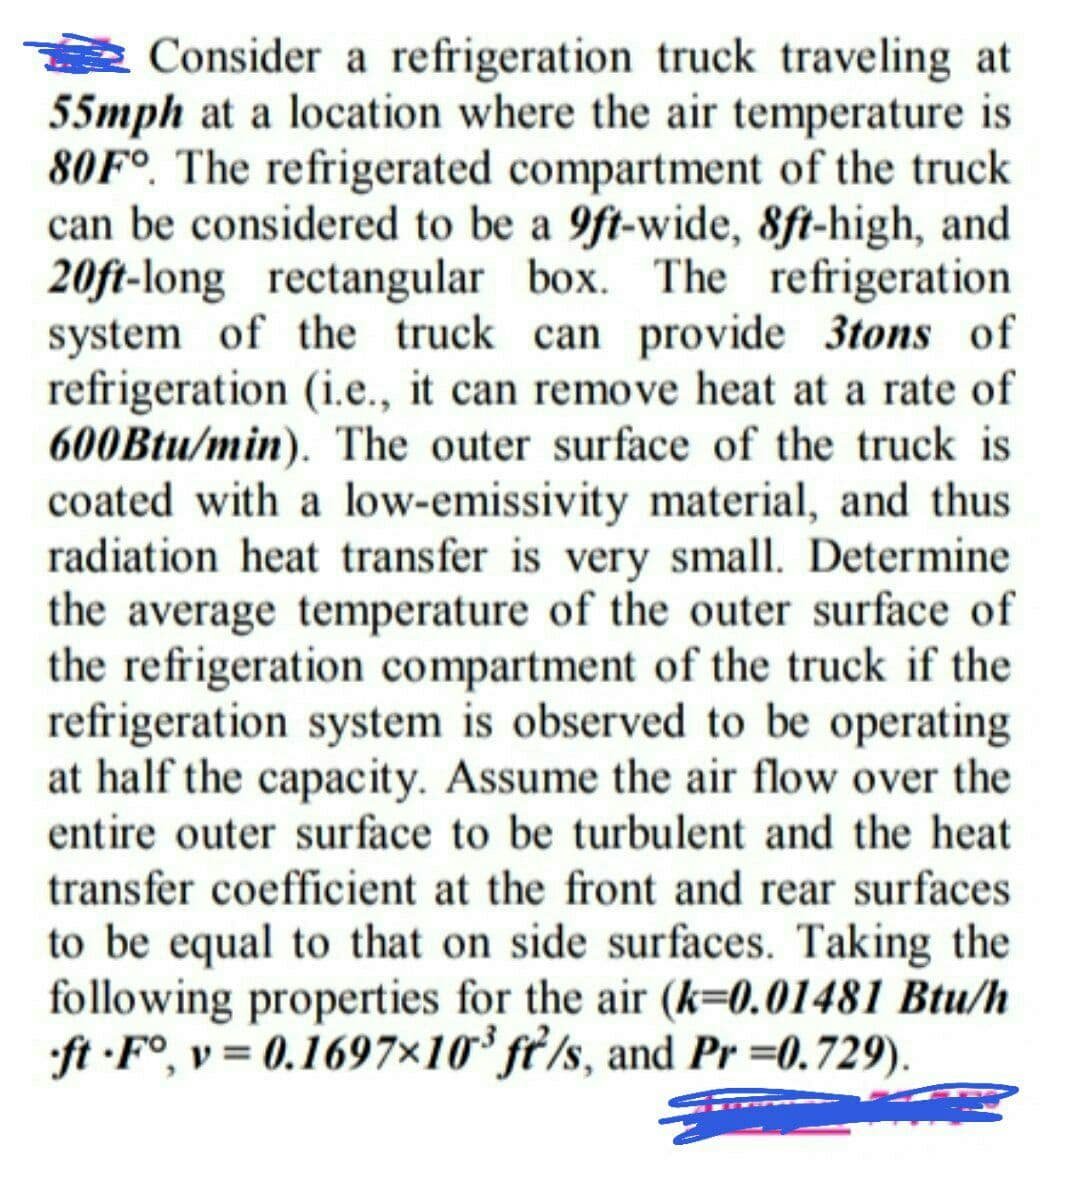 Consider a refrigeration truck traveling at
55mph at a location where the air temperature is
80F°. The refrigerated compartment of the truck
can be considered to be a 9ft-wide, 8ft-high, and
20ft-long rectangular box. The refrigeration
system of the truck can provide 3tons of
refrigeration (i.e., it can remove heat at a rate of
600Btu/min). The outer surface of the truck is
coated with a low-emissivity material, and thus
radiation heat transfer is very small. Determine
the average temperature of the outer surface of
the refrigeration compartment of the truck if the
refrigeration system is observed to be operating
at half the capacity. Assume the air flow over the
entire outer surface to be turbulent and the heat
transfer coefficient at the front and rear surfaces
to be equal to that on side surfaces. Taking the
following properties for the air (k=0.01481 Btu/h
ft -F°, v= 0.1697×10° ft/s, and Pr =0.729).
